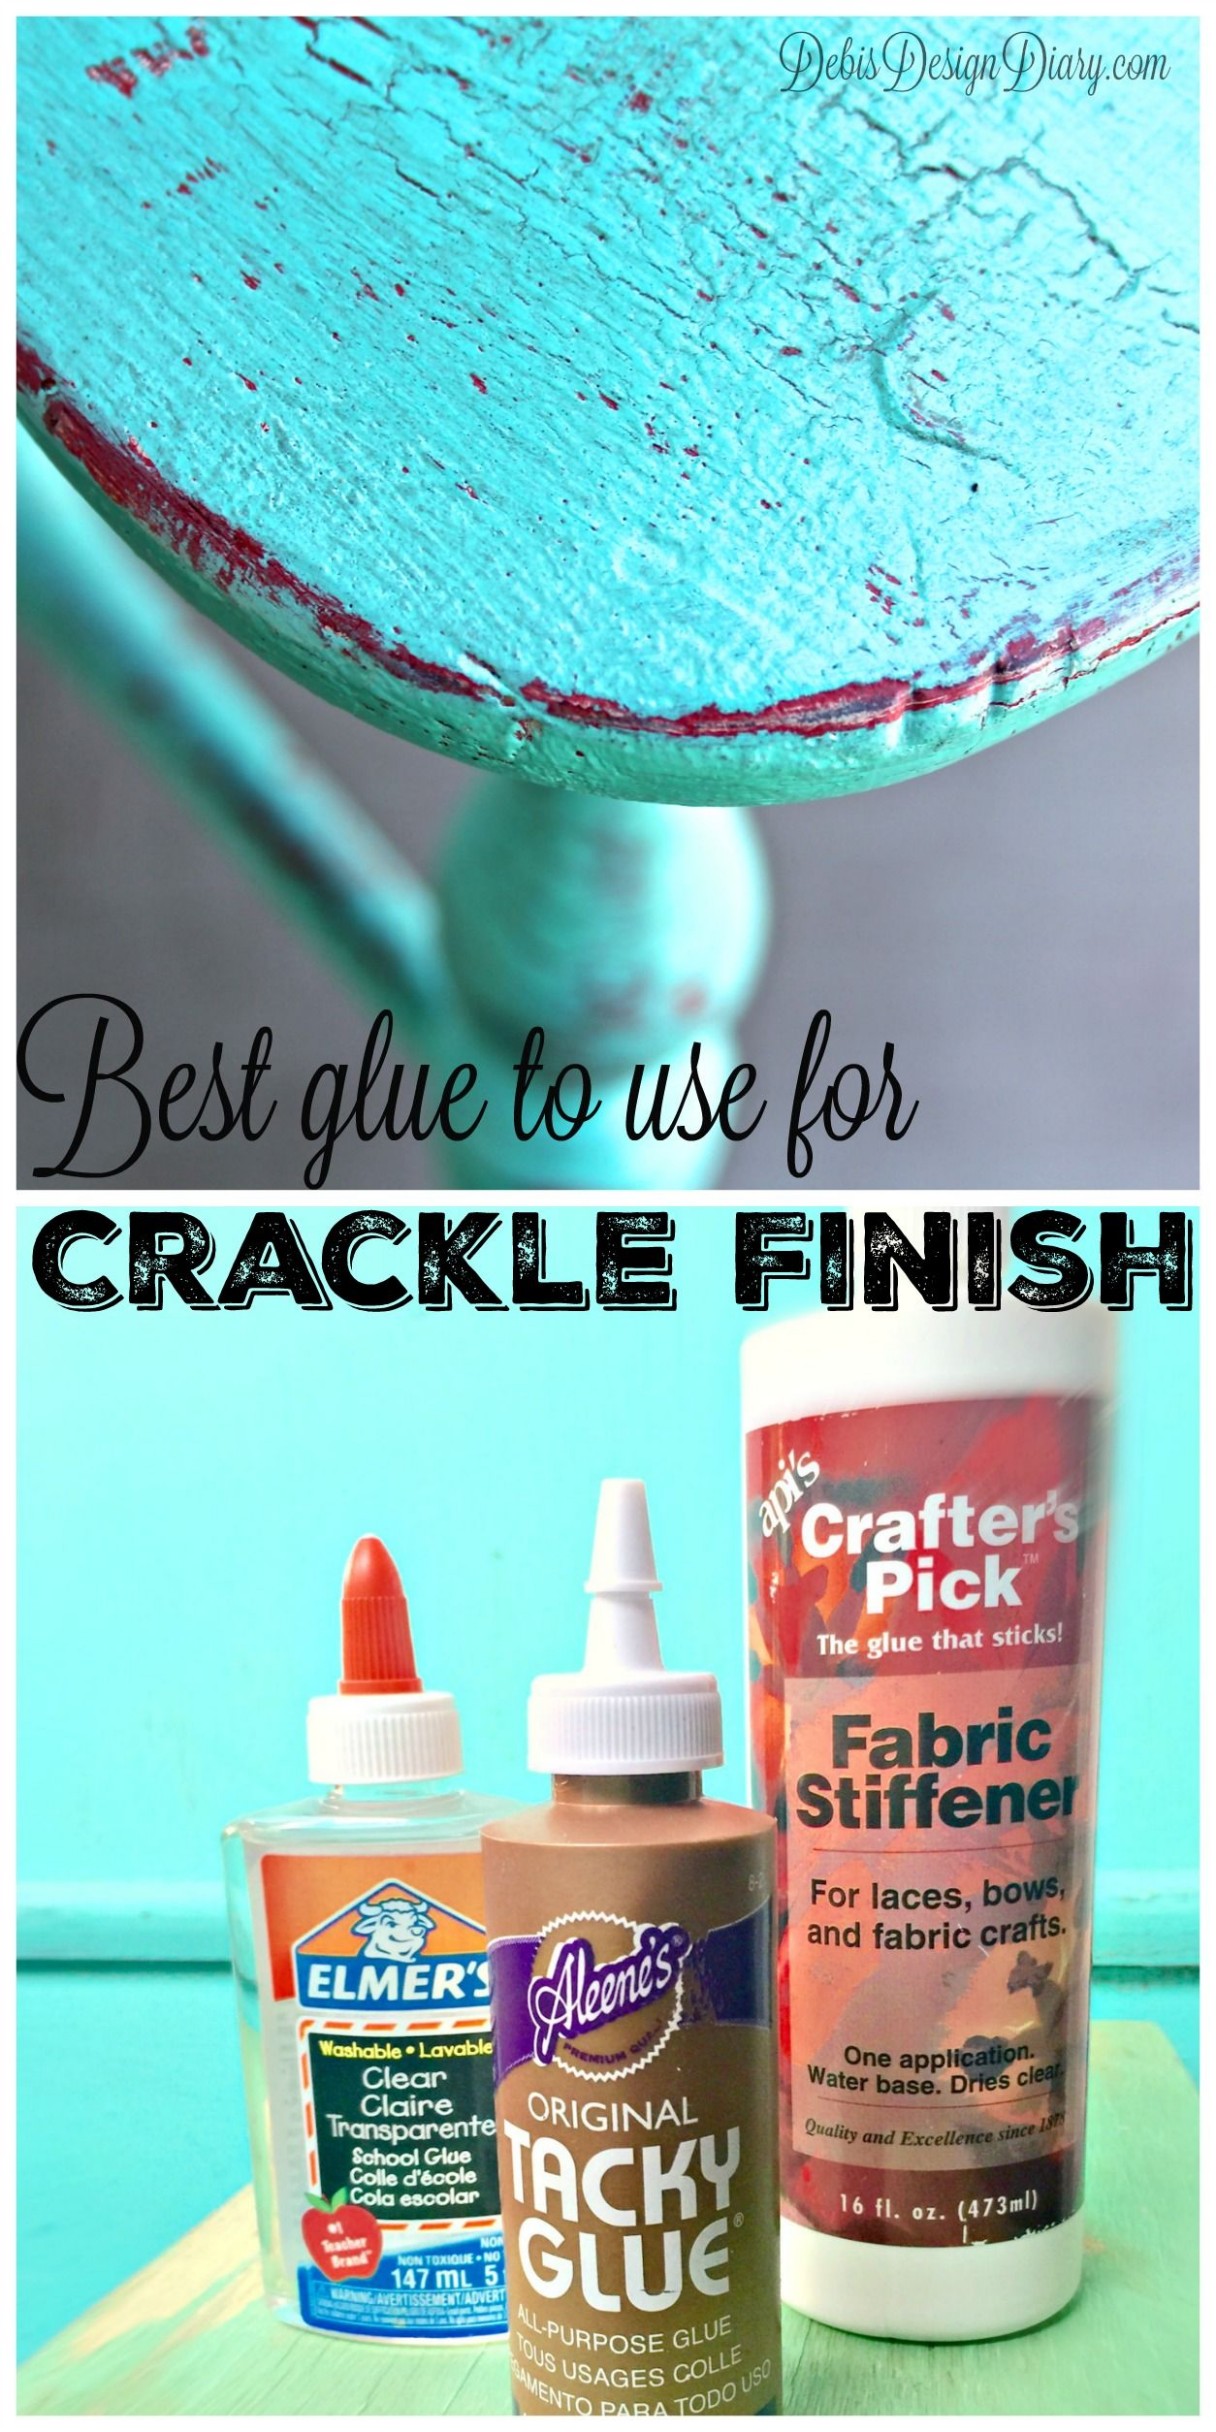 Elmers Glue Paint Easy Craft Ideas Can You Use Chalk Paint Over Le Paint